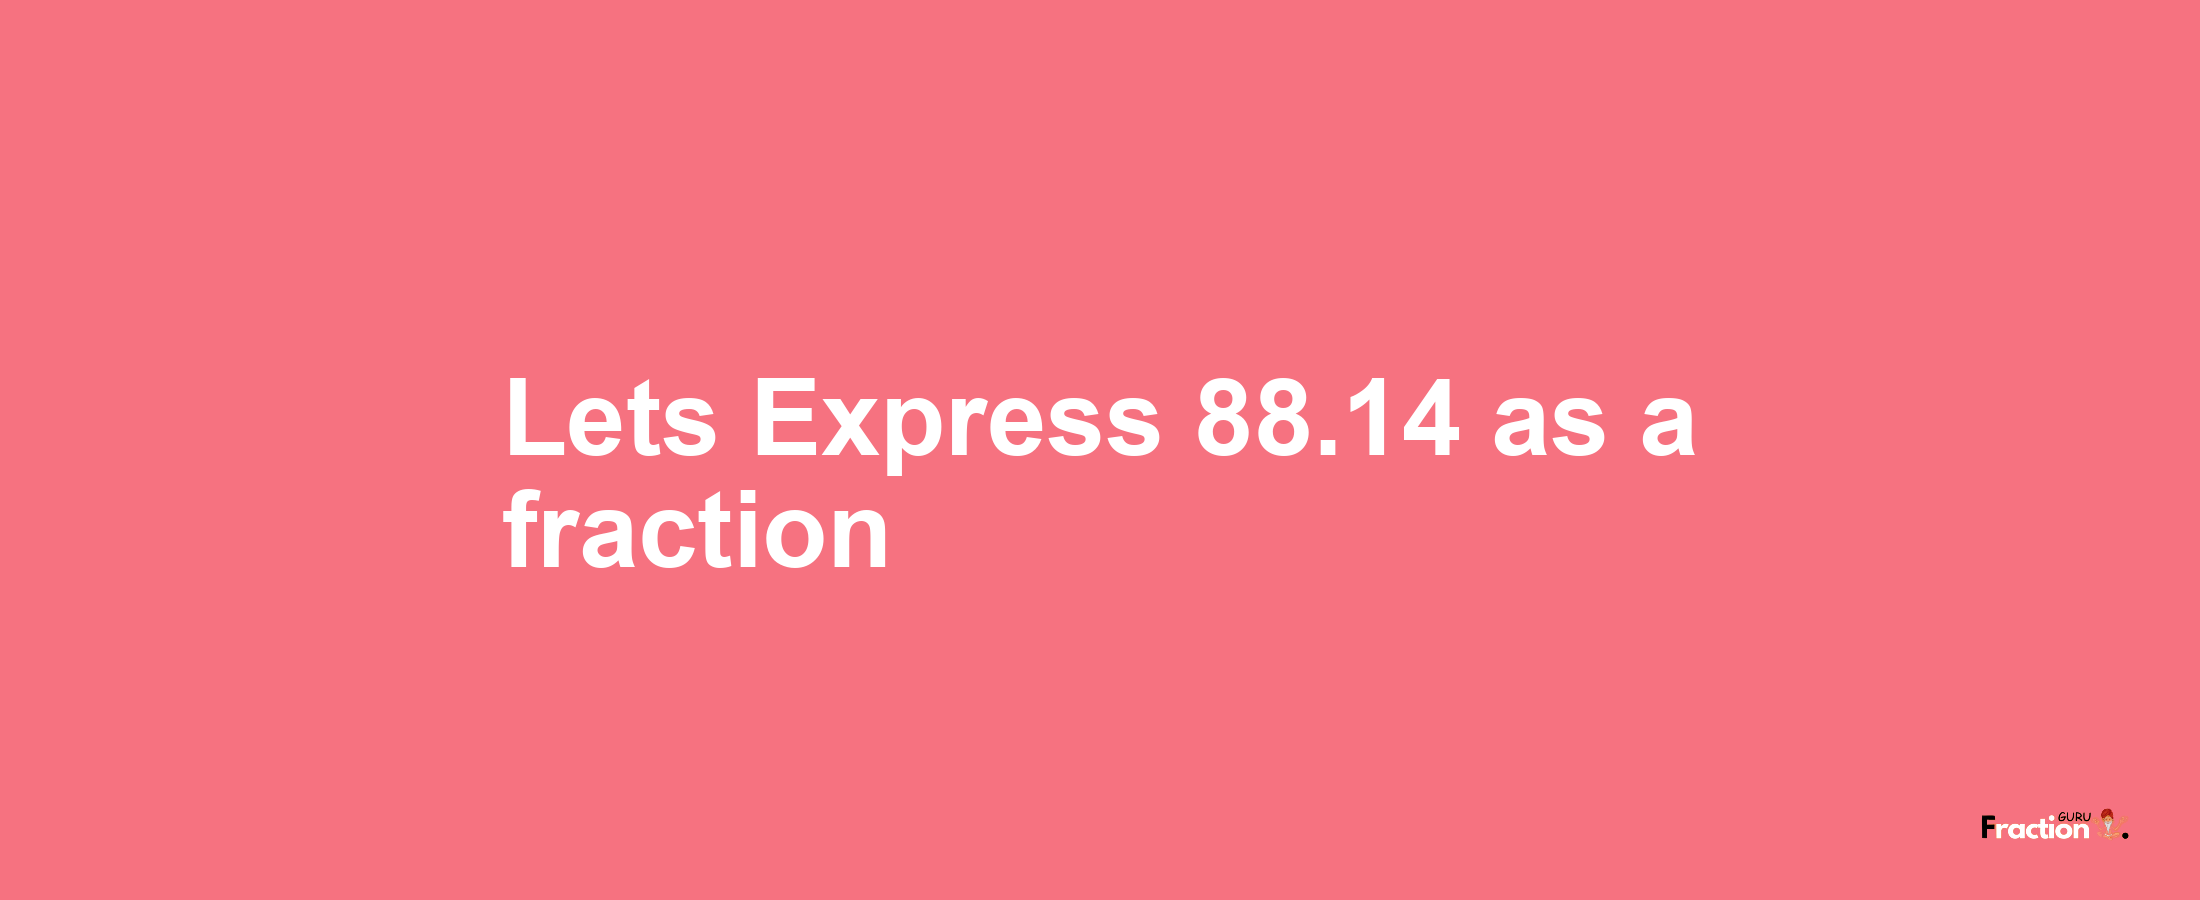 Lets Express 88.14 as afraction